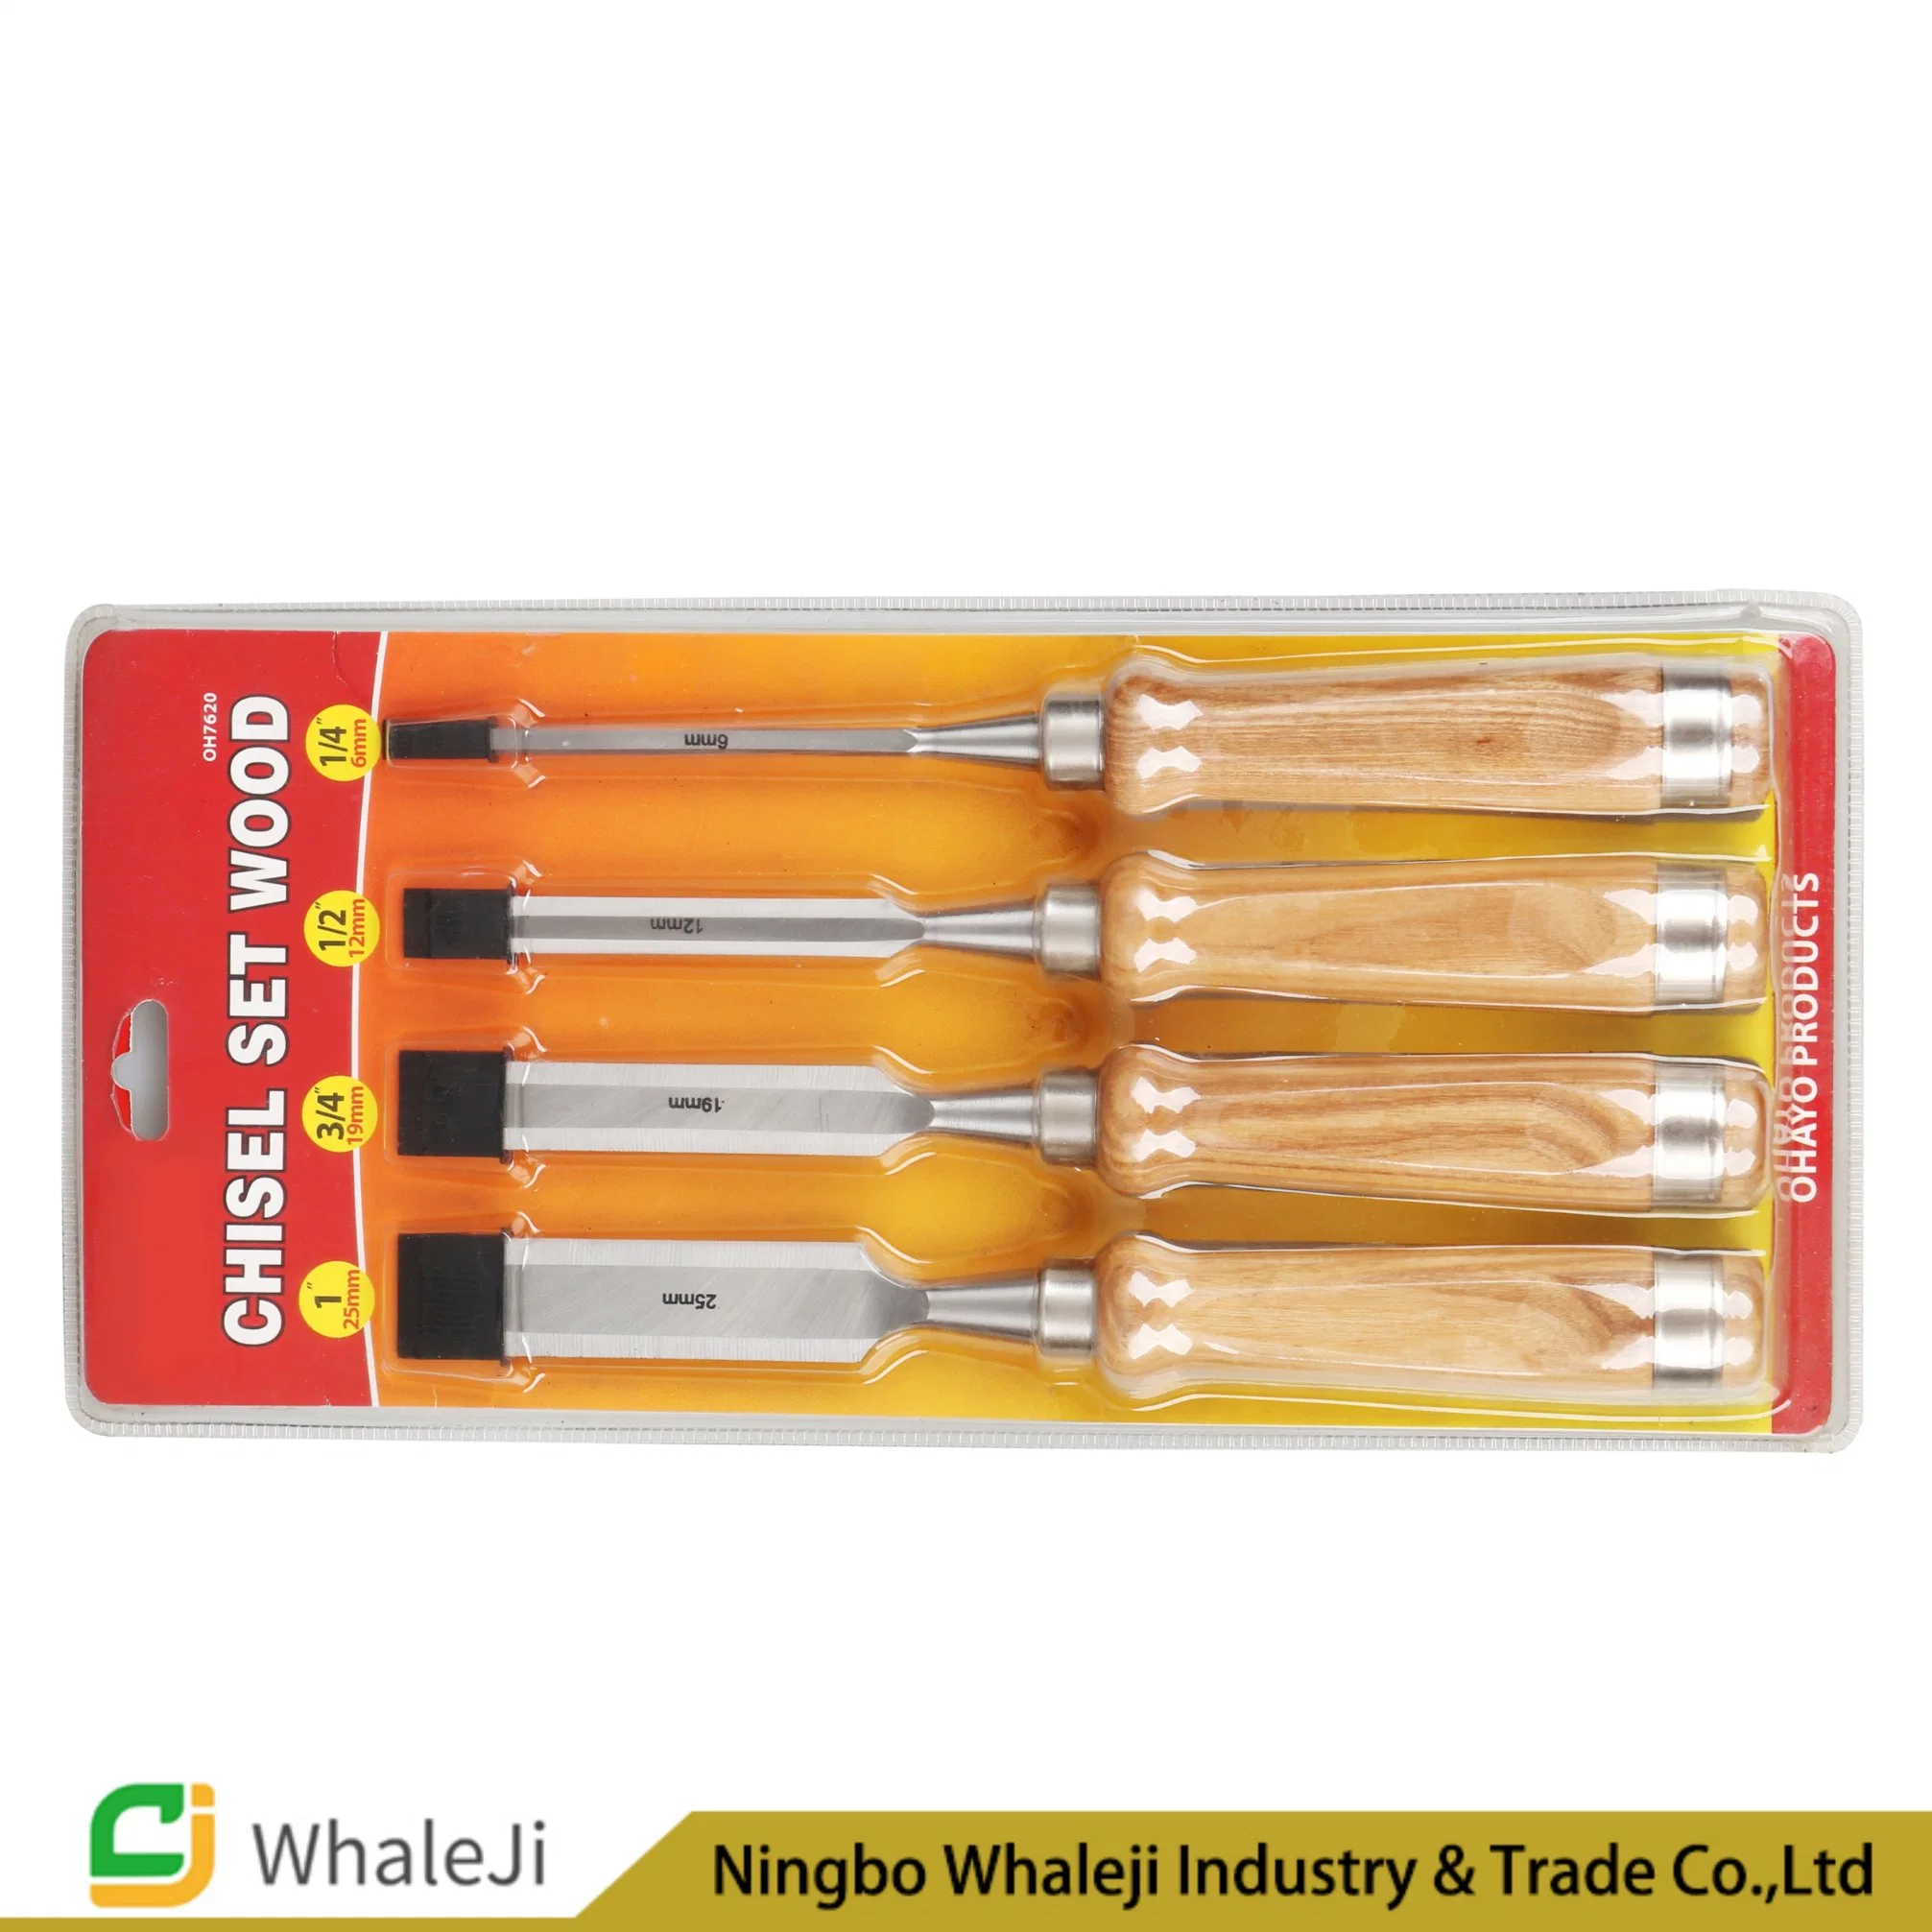 Professional Woodworking Chisel Tool Set with 4 Pieces and Wooden Handles